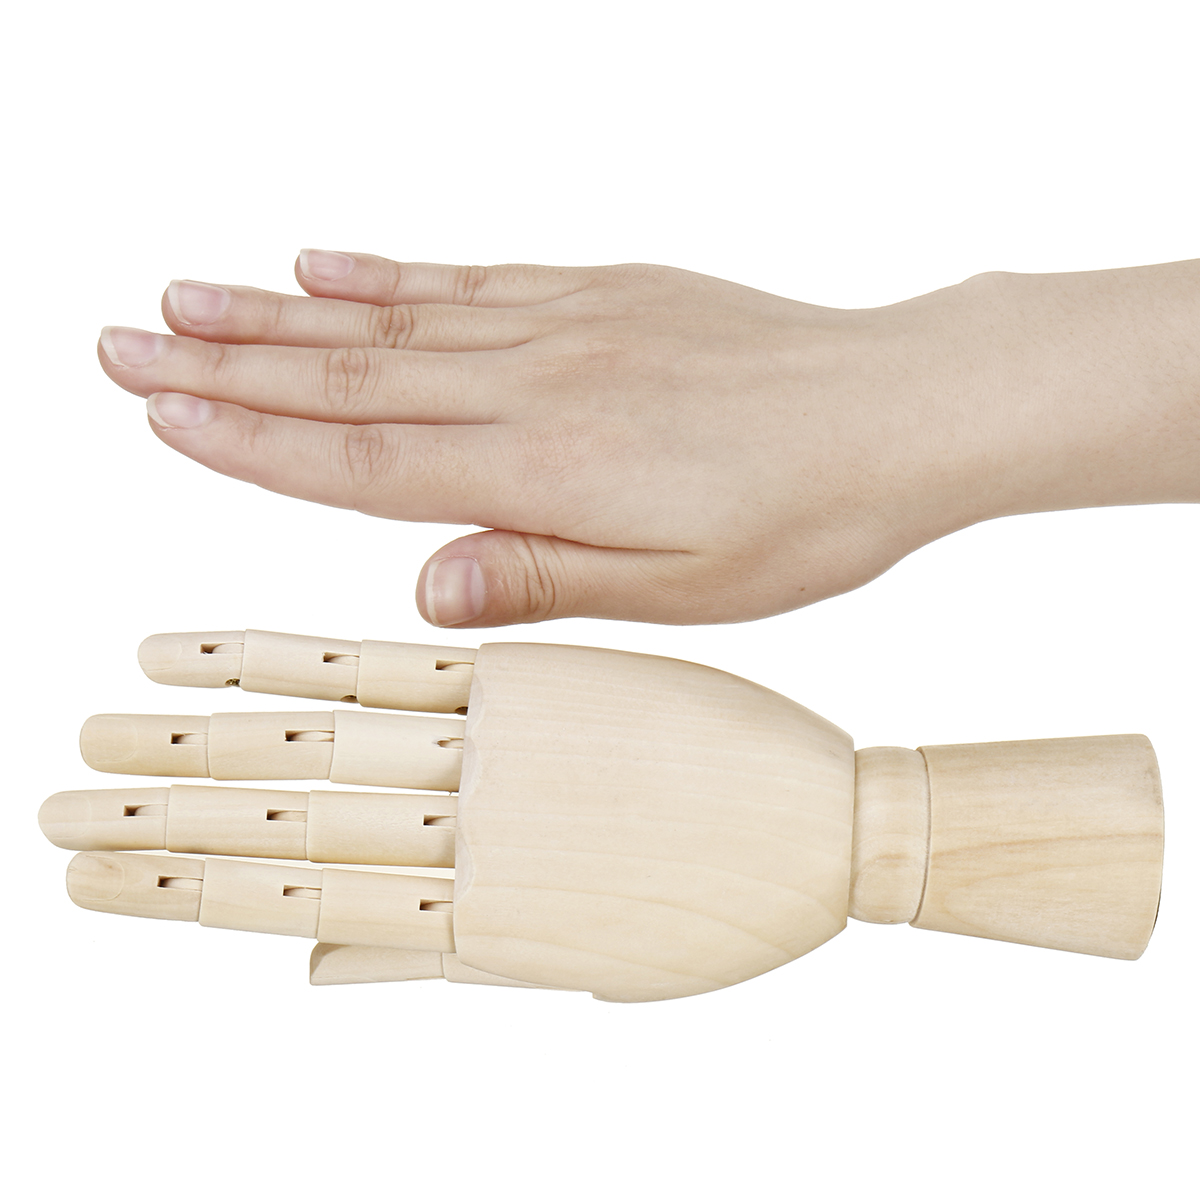 781012-Inch-Wooden-Hand-Body-Artist-Medical-Model-Flexible-Jointed-Wood-Sculpture-DIY-Education-1322443-4